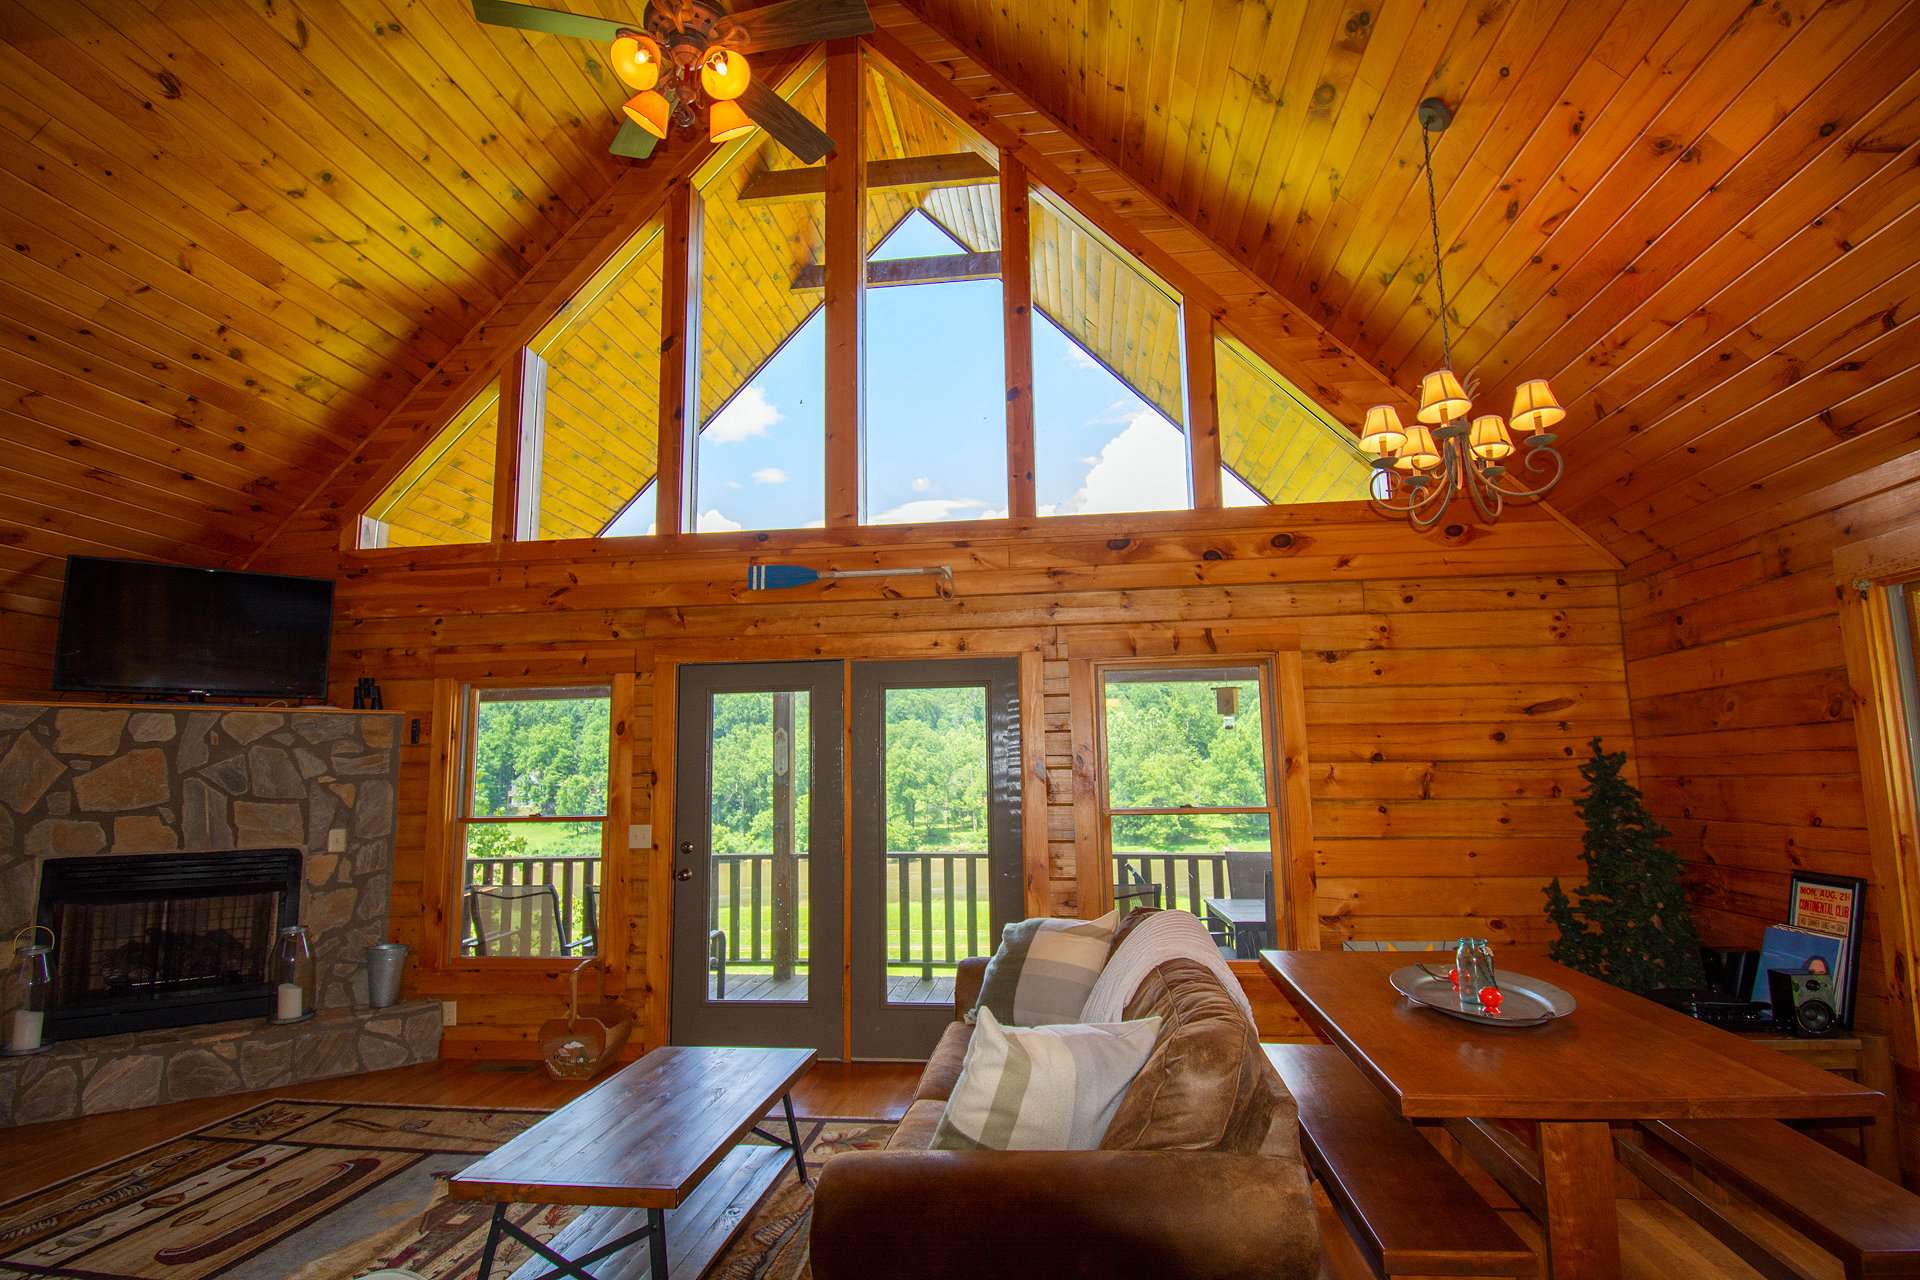 Enter the spacious great room featuring wood floors, stone fireplace and soaring vaulted ceiling with high windows filling the common area with natural light and an incredible view of the New River and surrounding mountains.